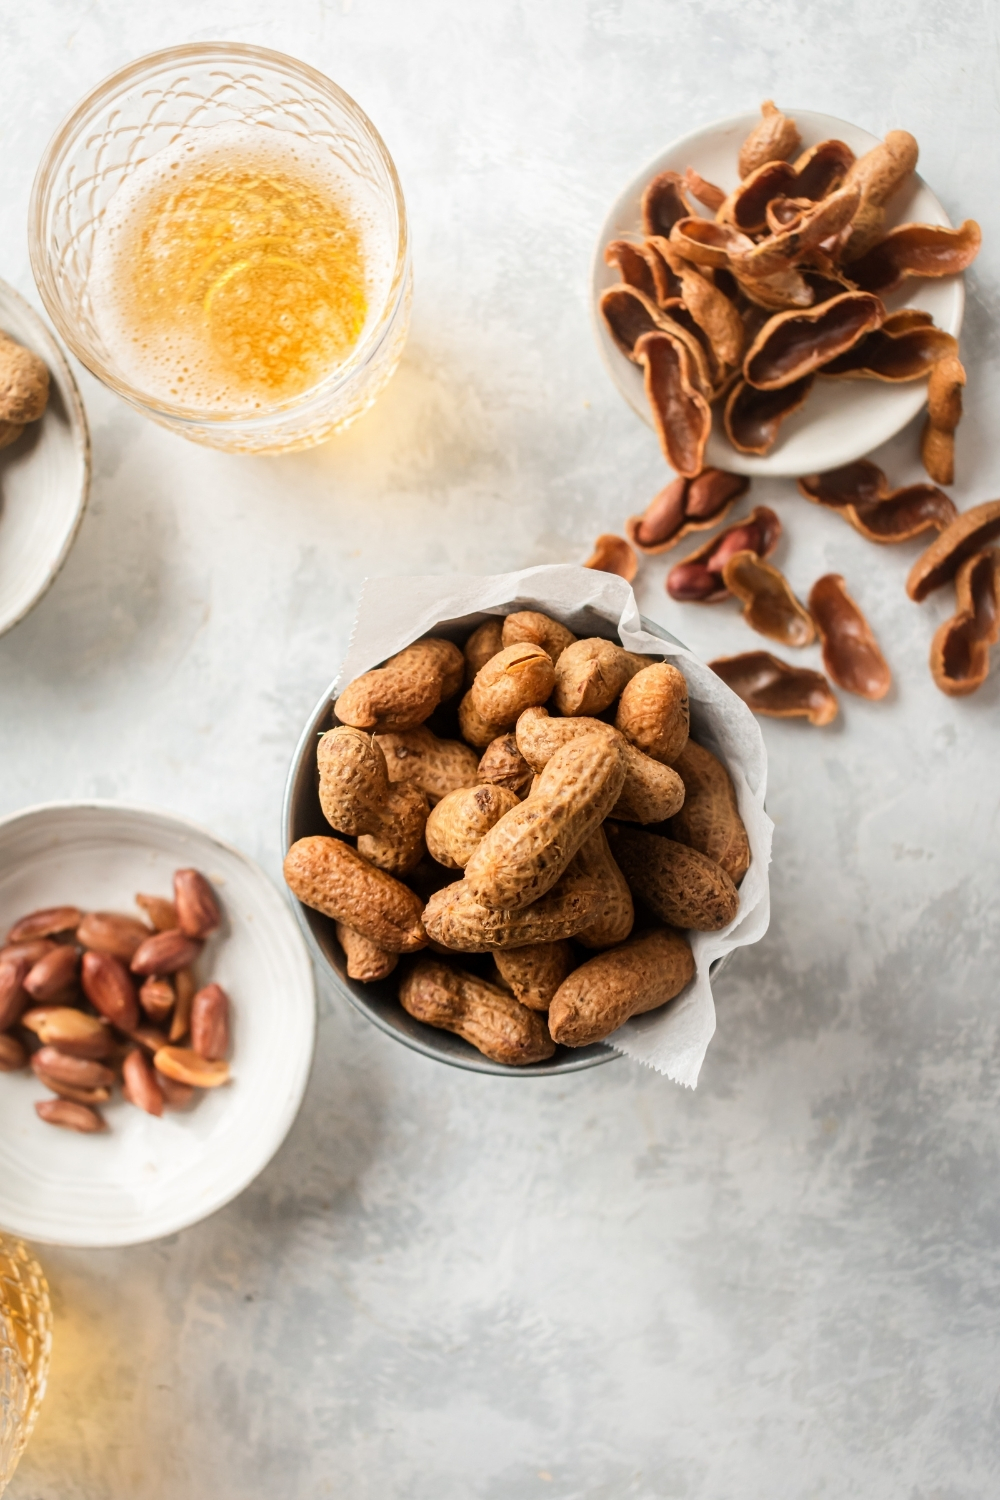 I shelled peanuts in a cup with parchment paper on a gray counter. To the left of that is a small plate of peanuts and to the right a small plate of shells. Behind the cup of shelled peanuts is a glass of beer.